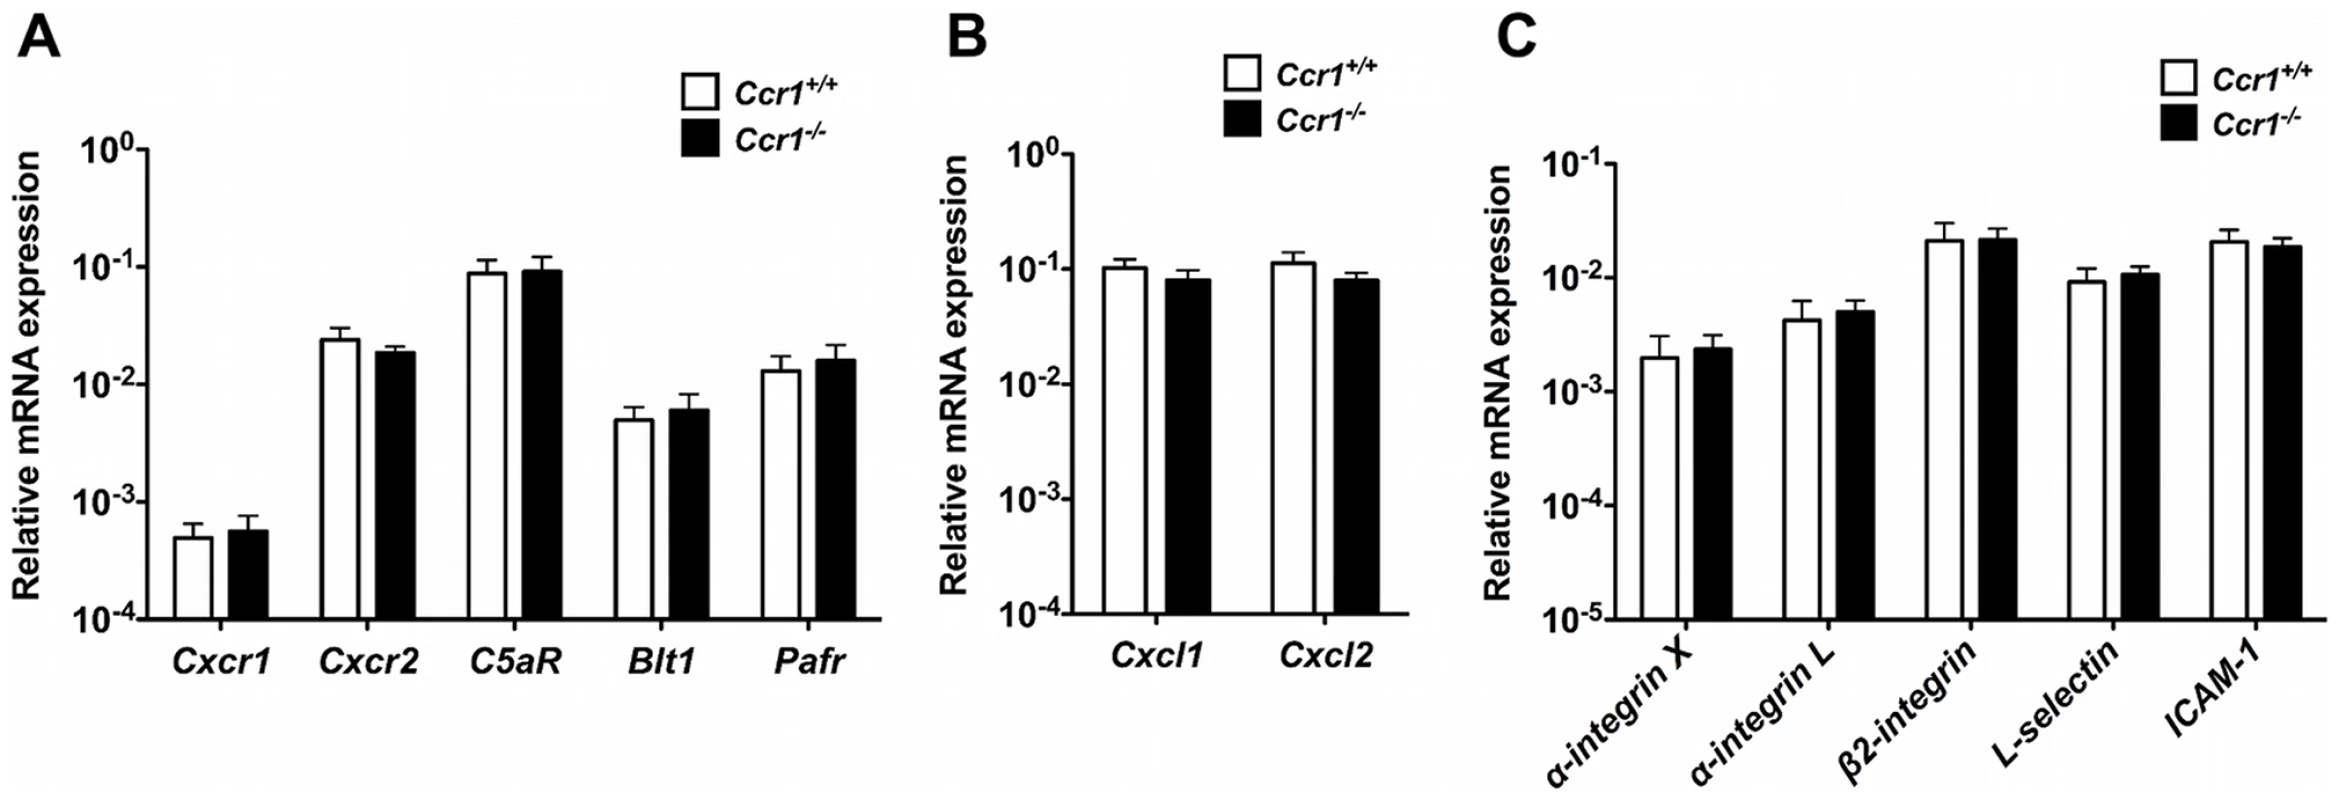 Ccr1 deficiency does not decrease the expression of other neutrophil-targeted chemotactic factors or adhesion molecules in <i>Candida</i>-infected kidneys.